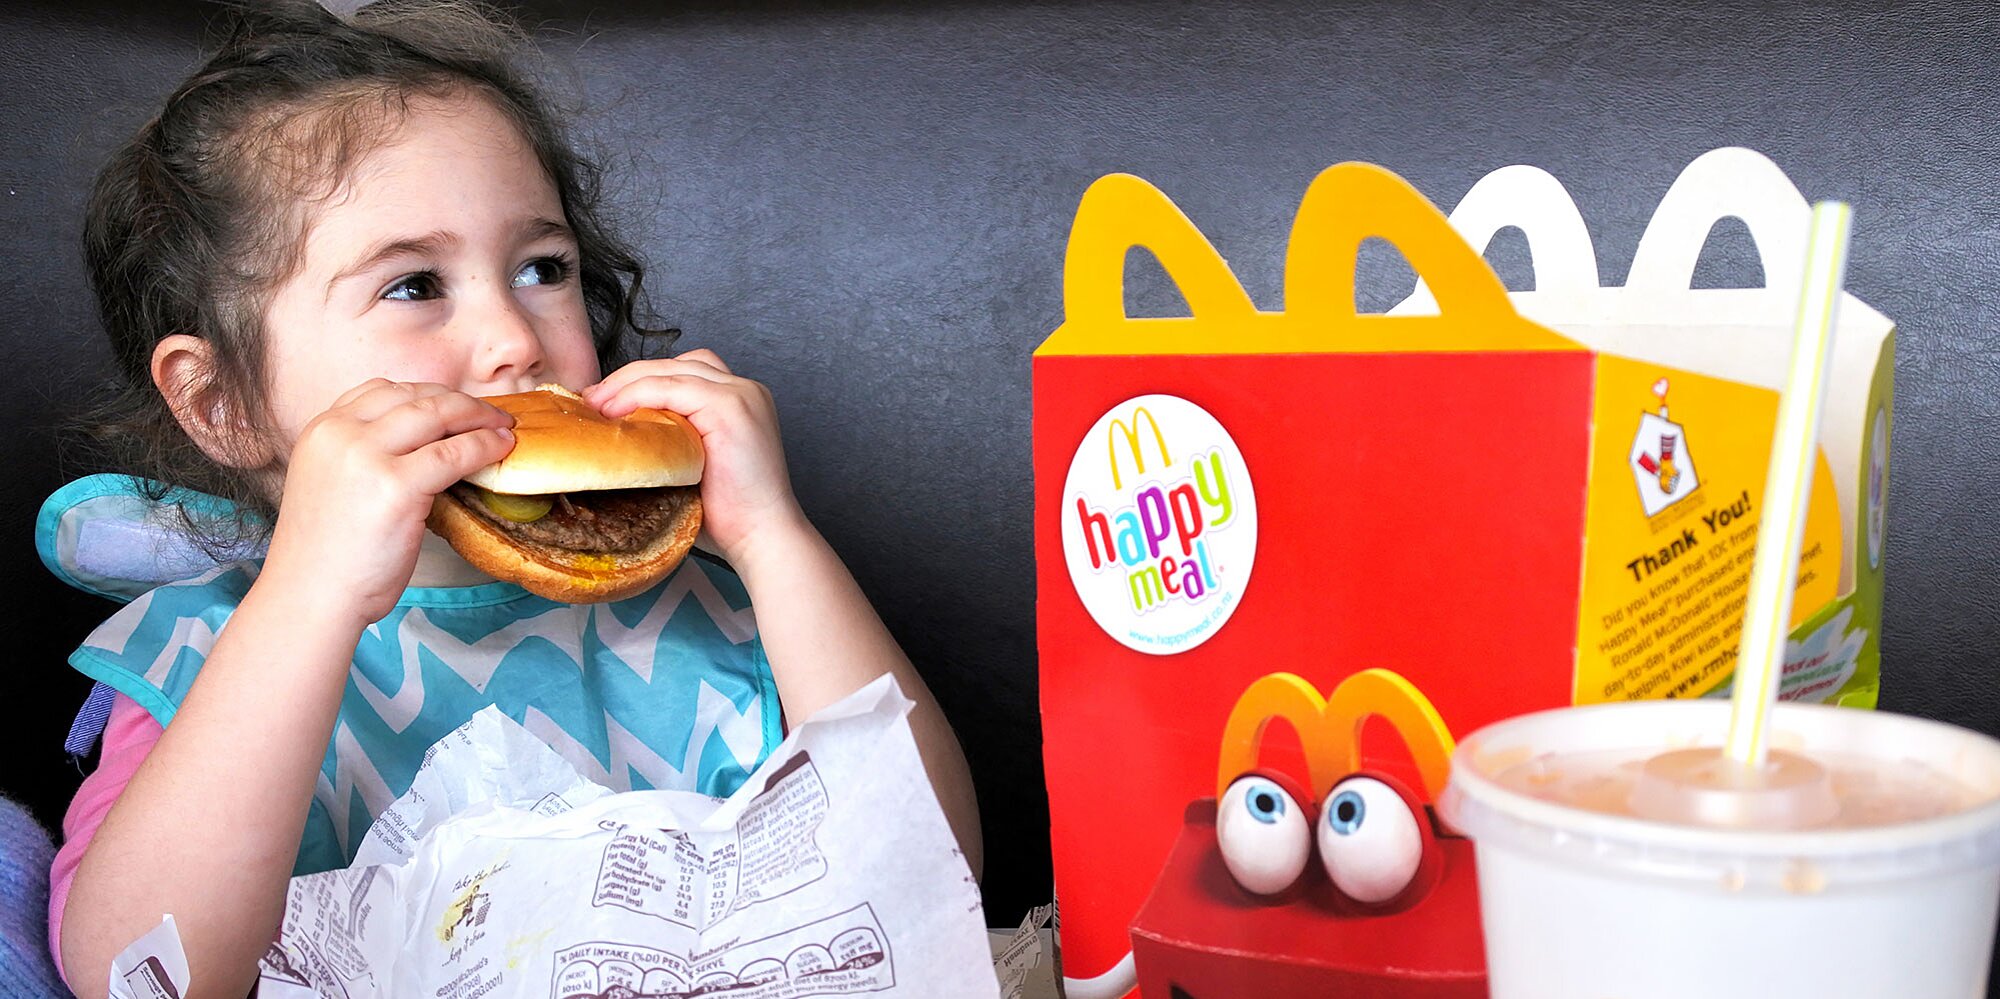 McDonald's begins phasing out plastic toys in Happy Meals